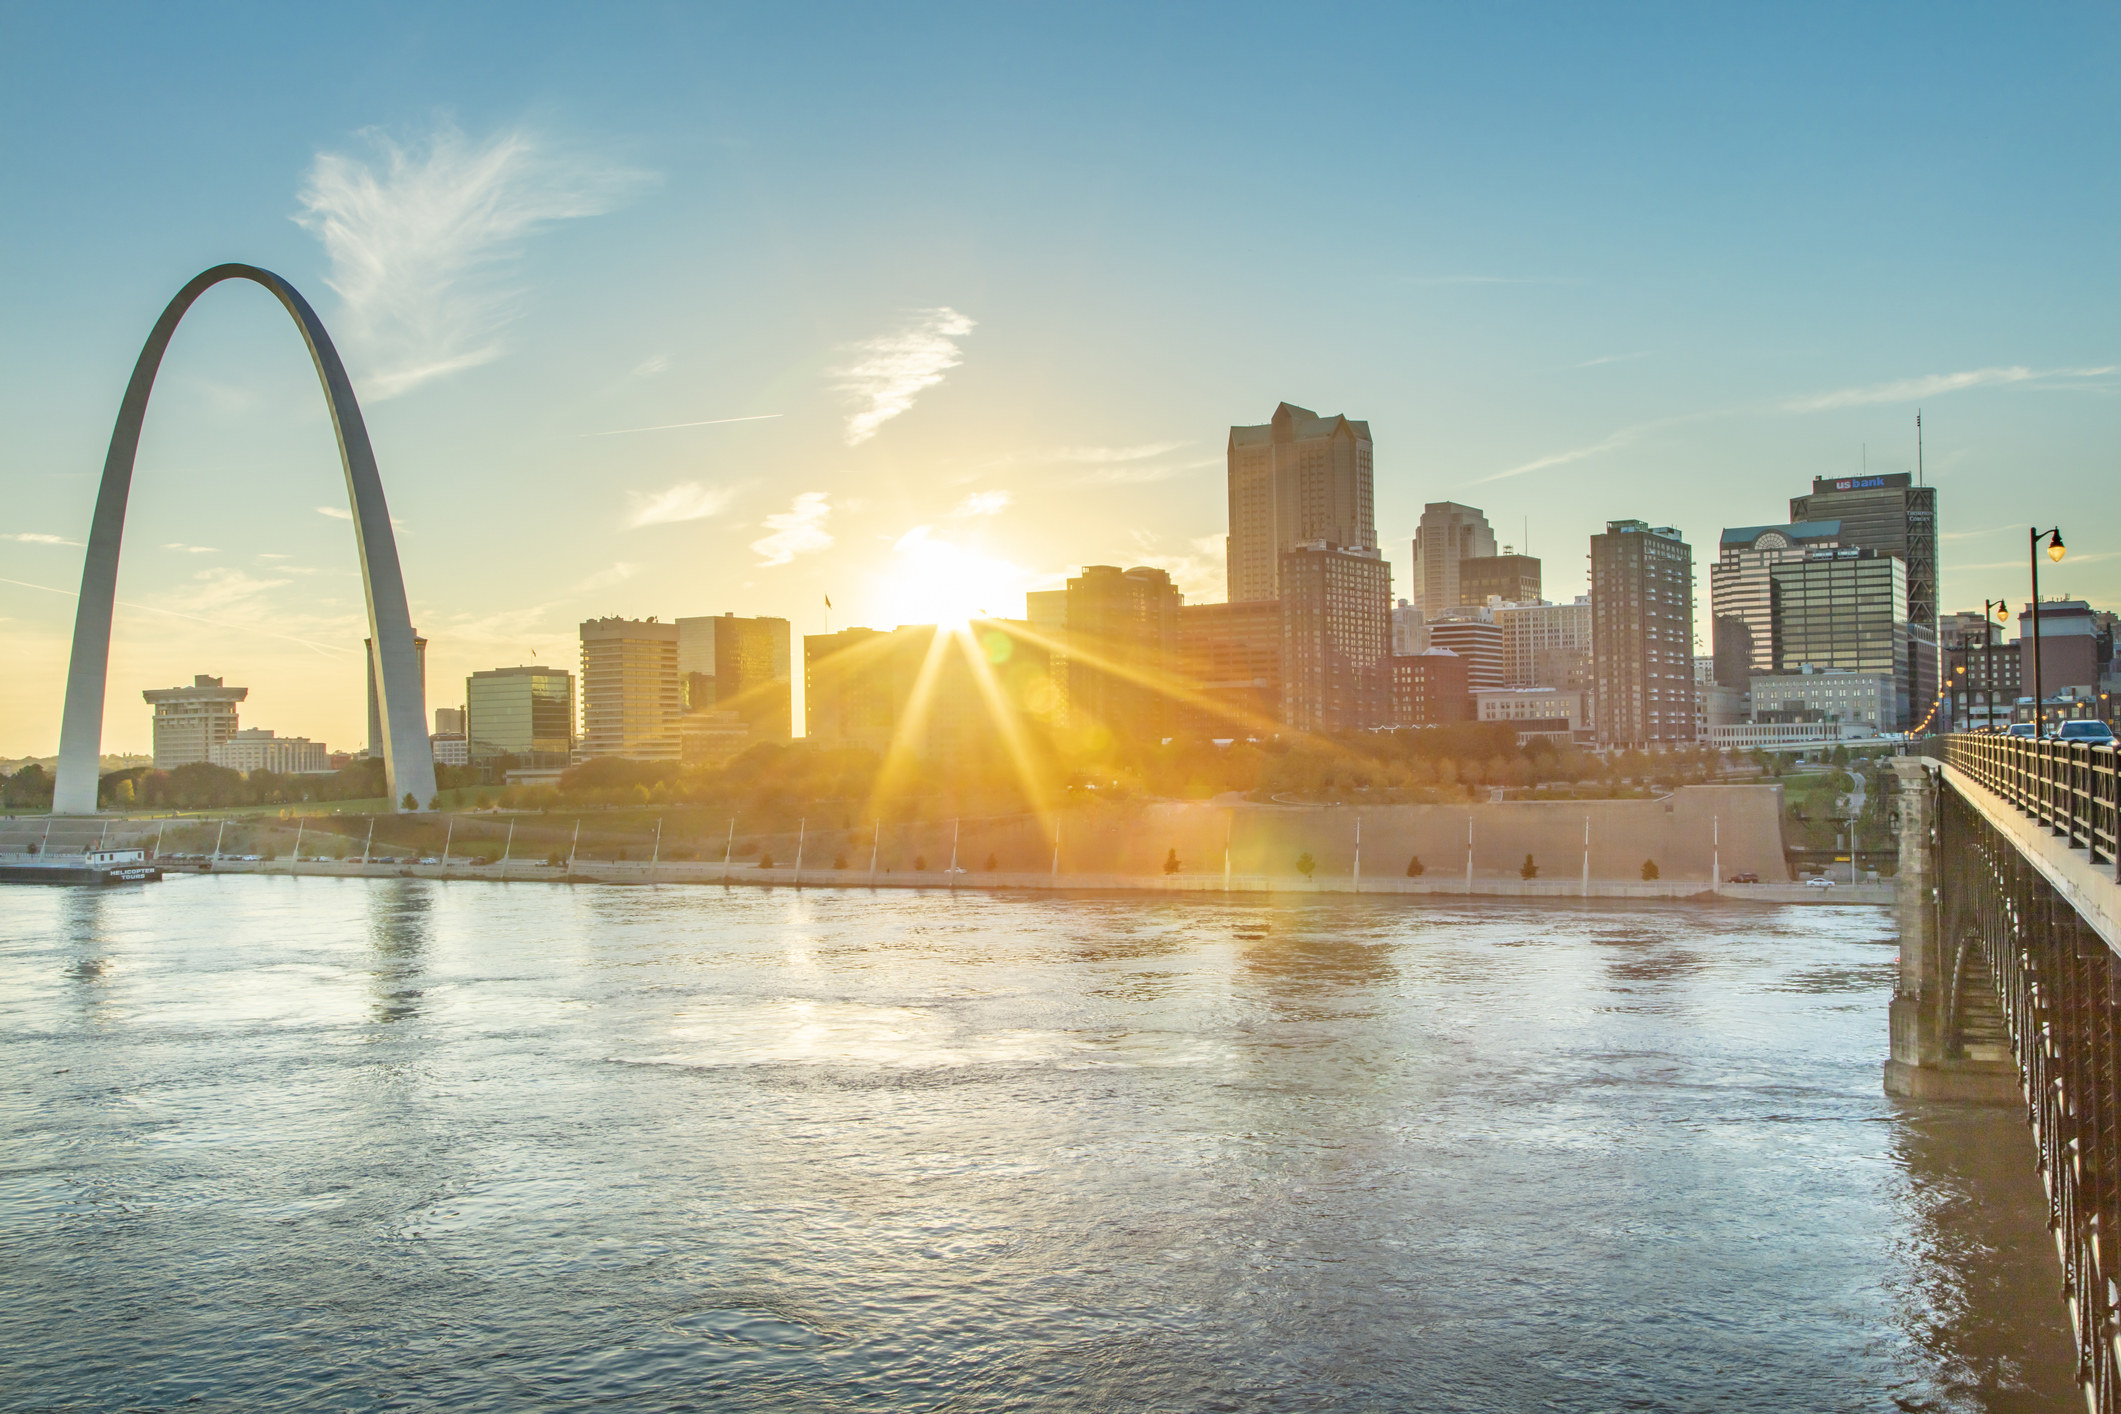 St. Louis and the setting sun.